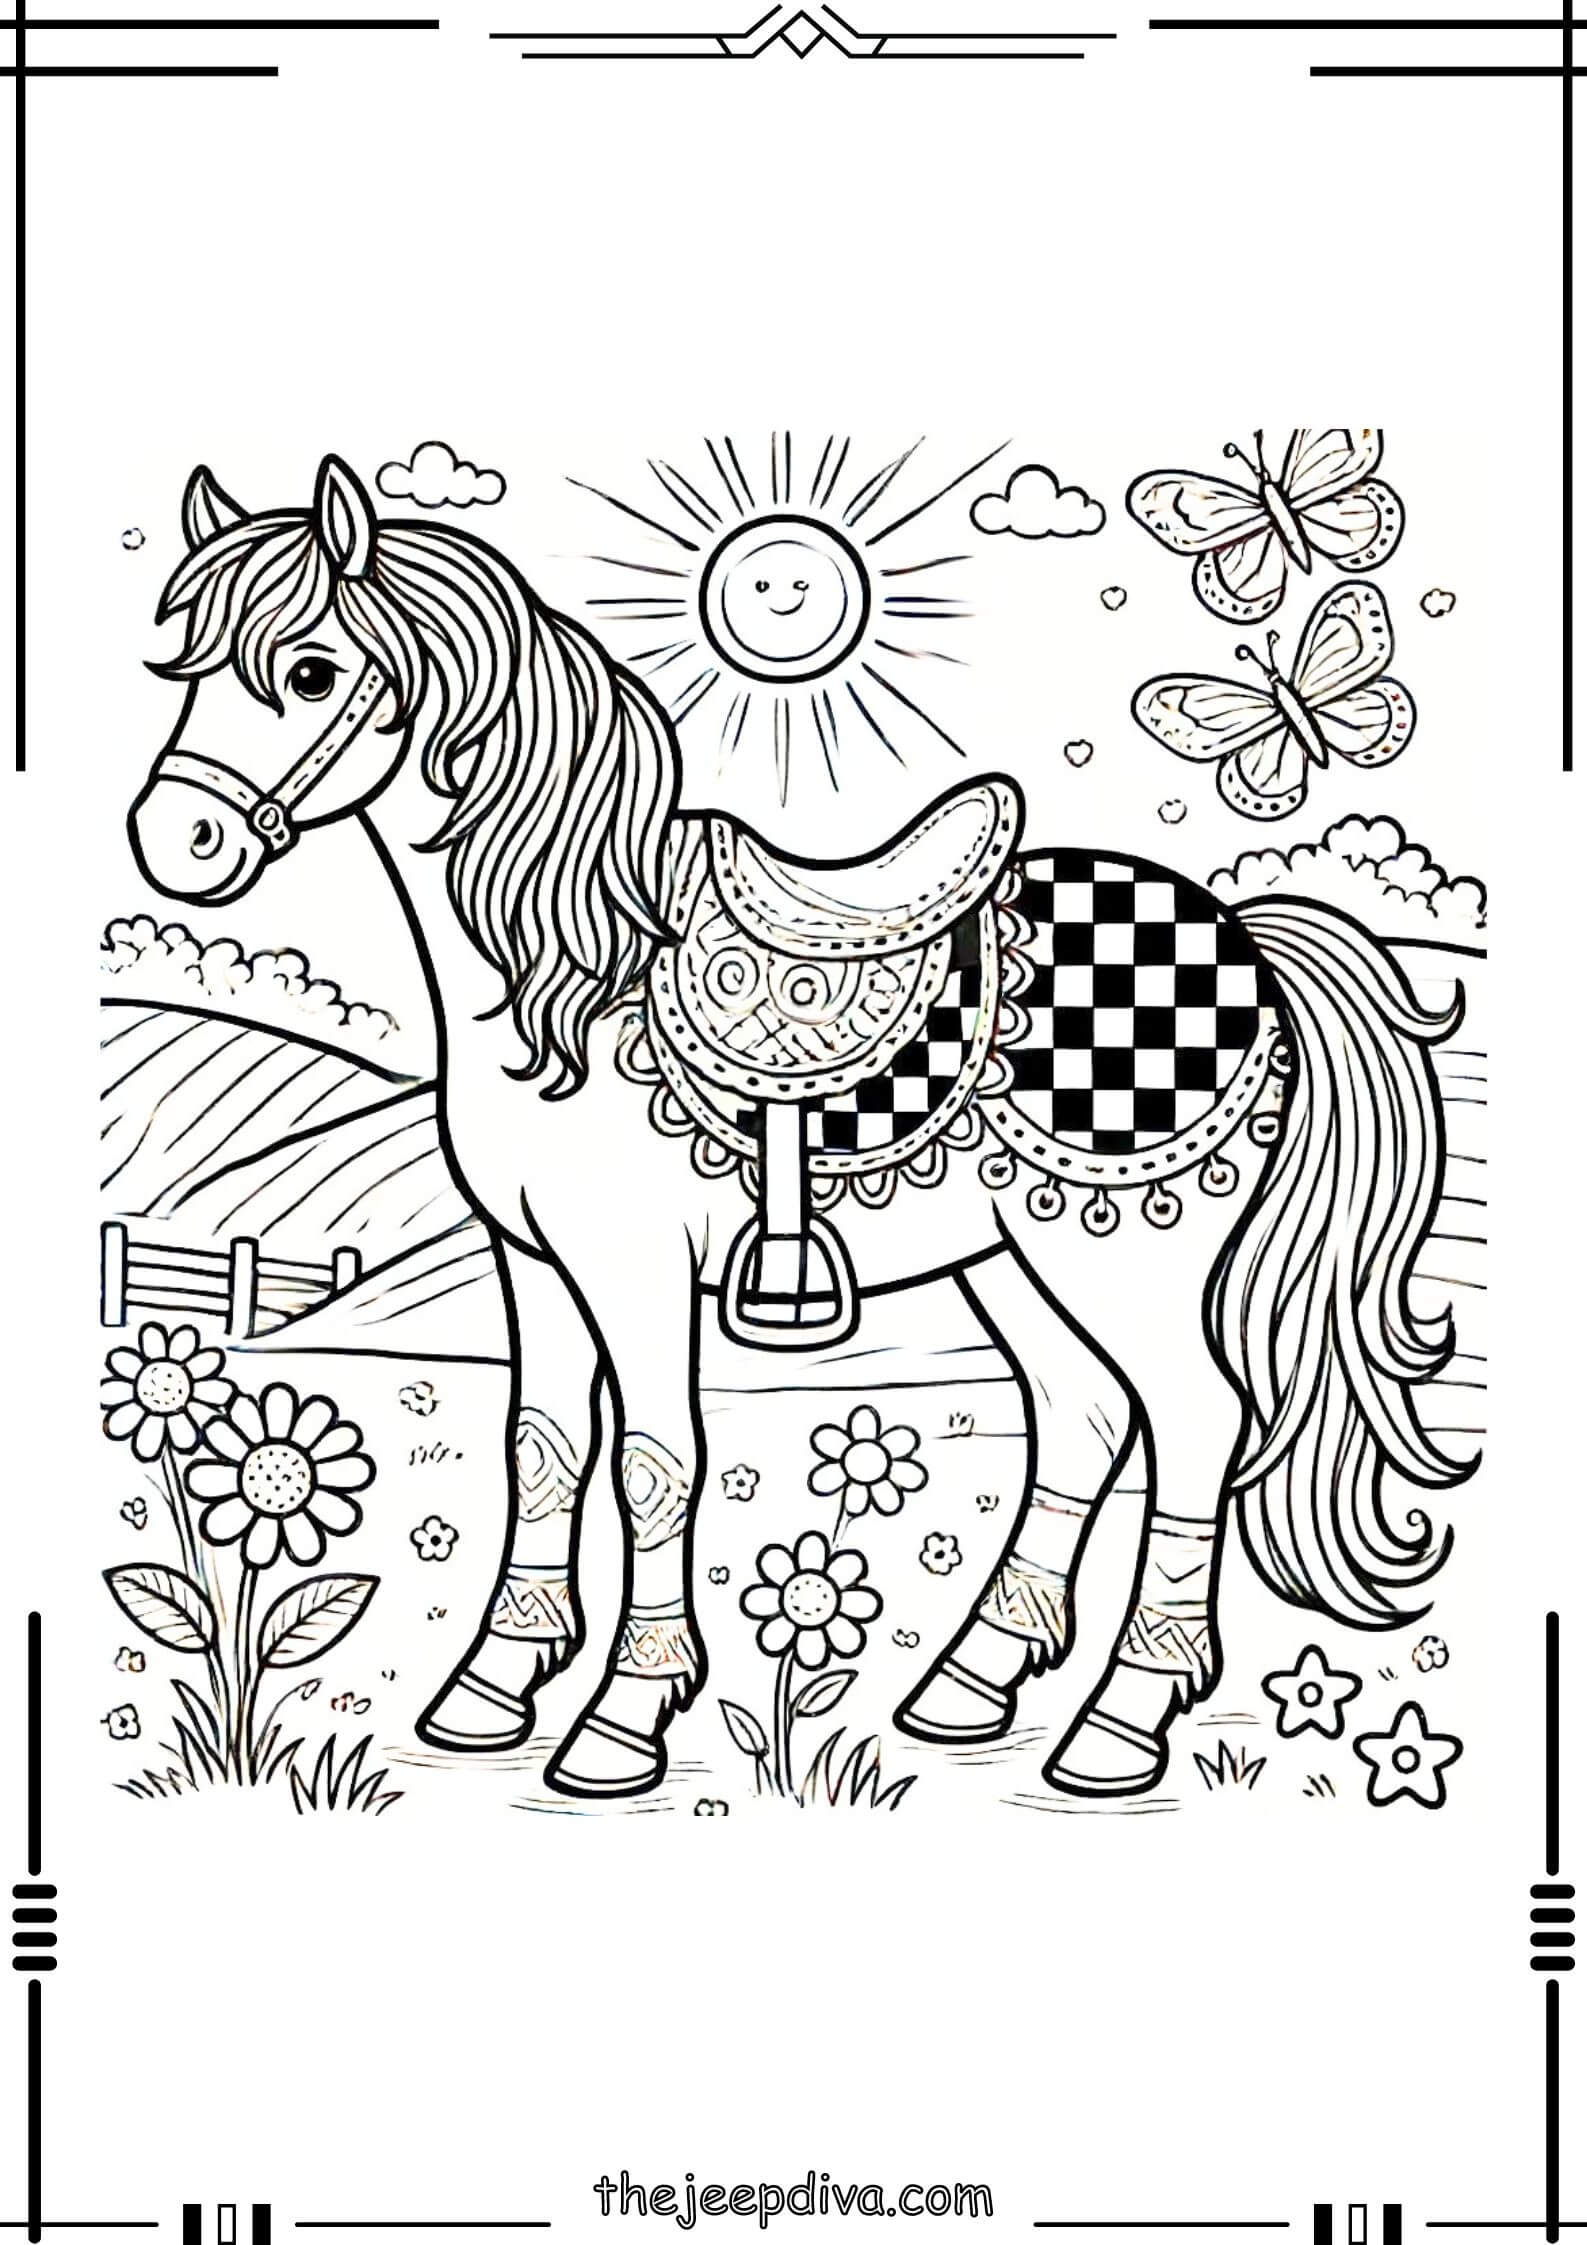 Horse-Colouring-Pages-Hard-19